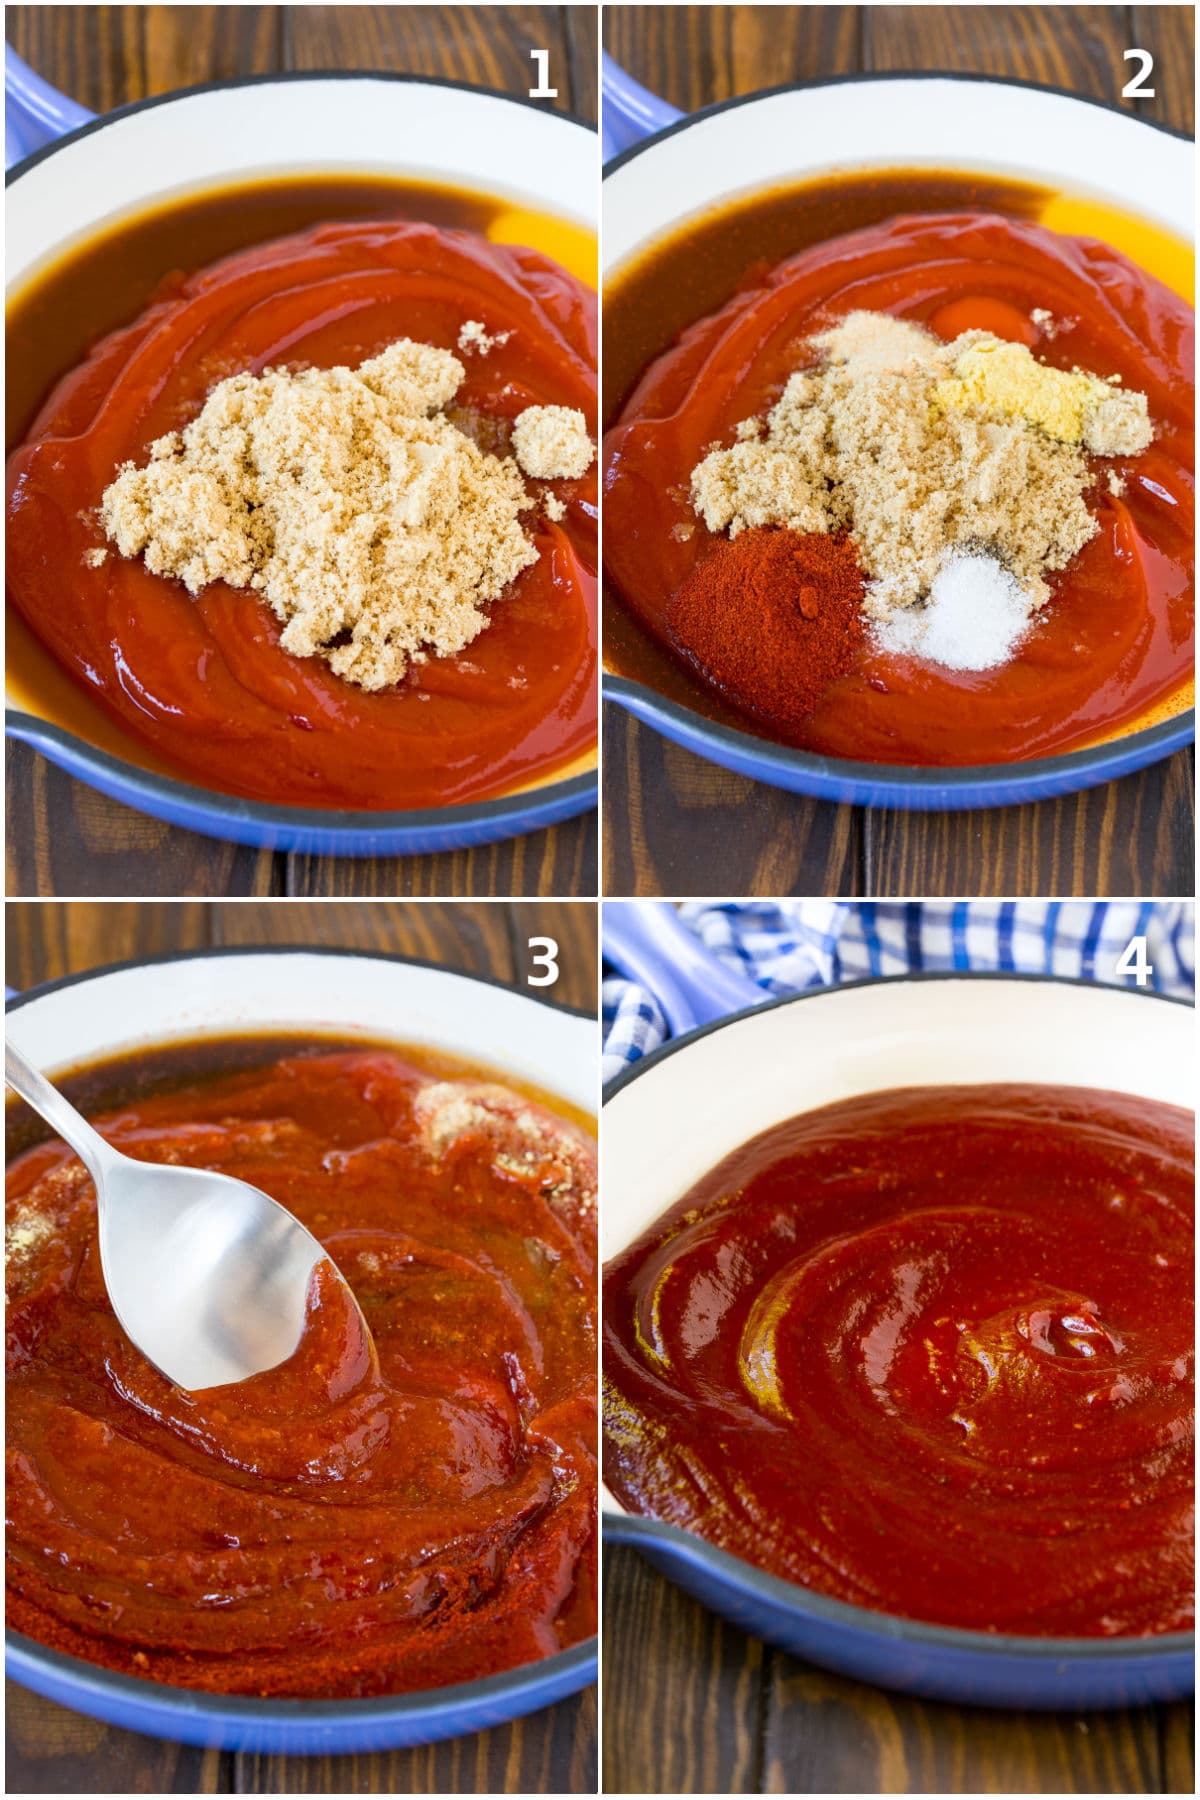 Step by step shots showing how to make barbecue sauce.